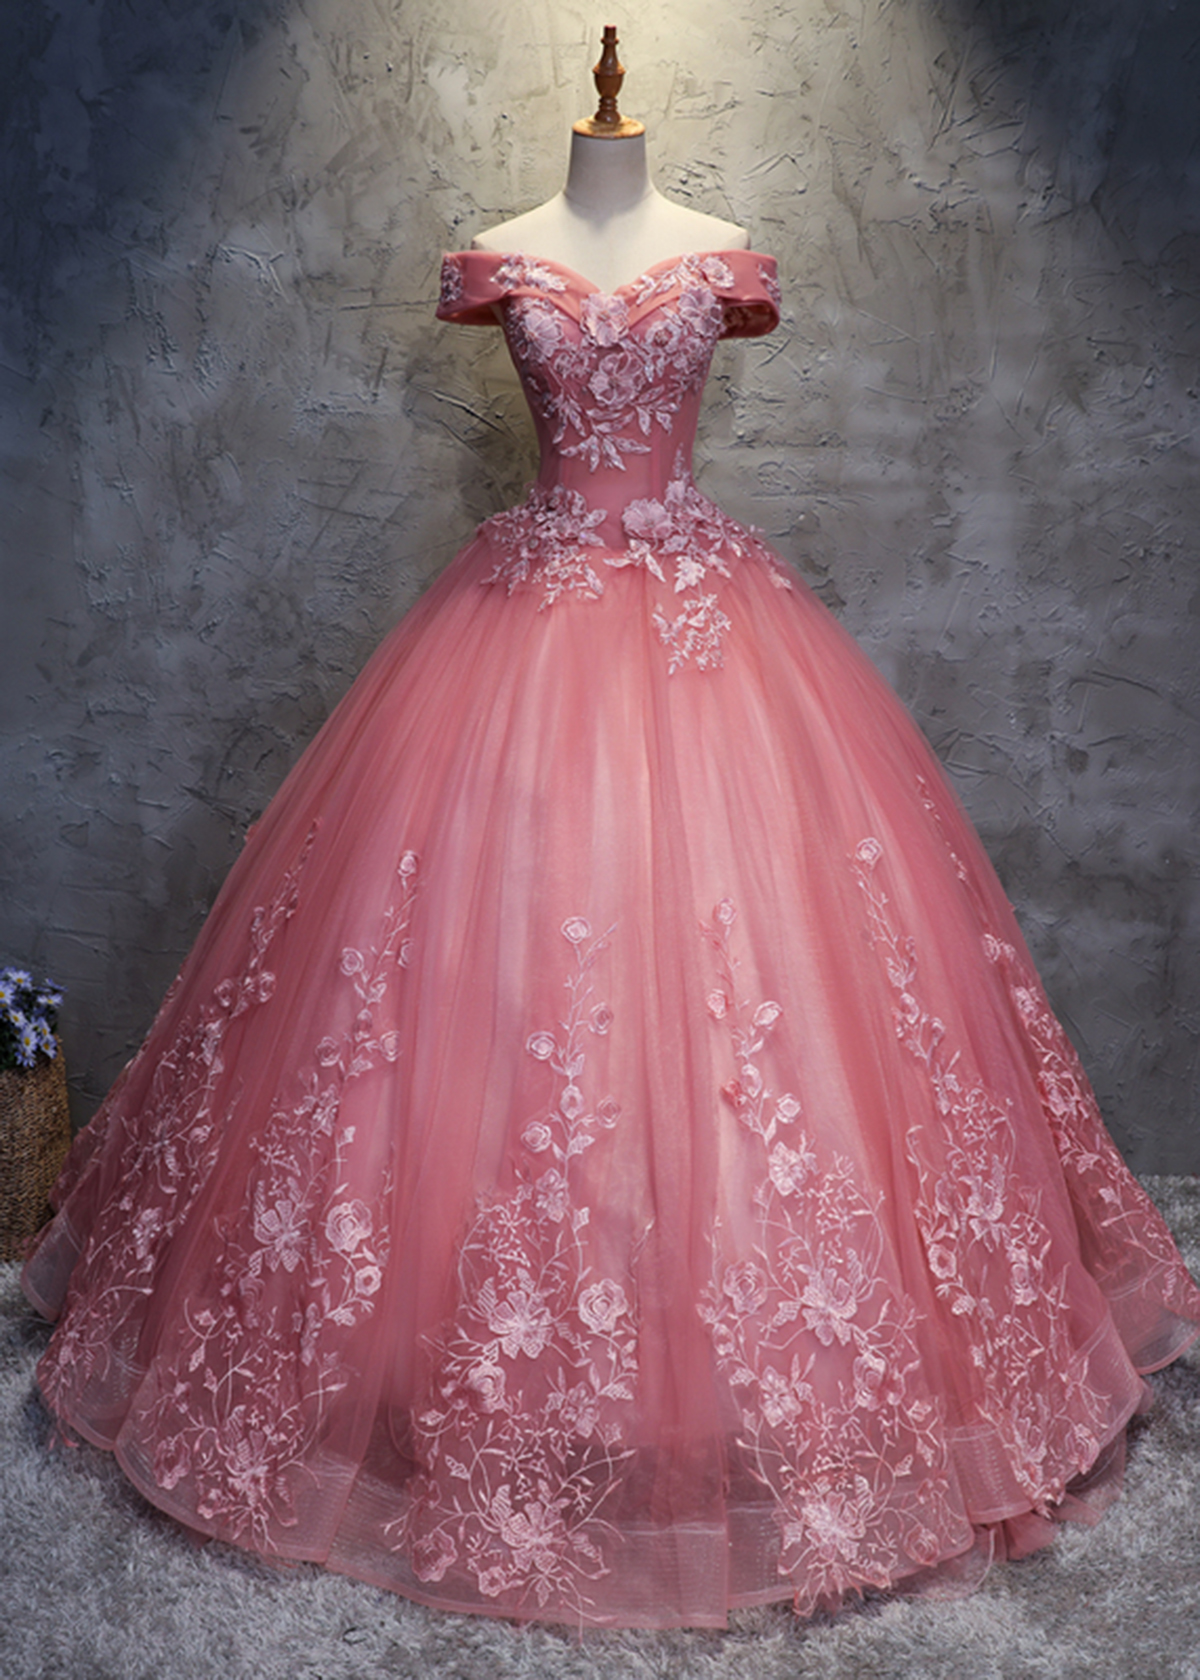 Ball Gown Pink Tulle Appliques Flower Girl Dresses 2018